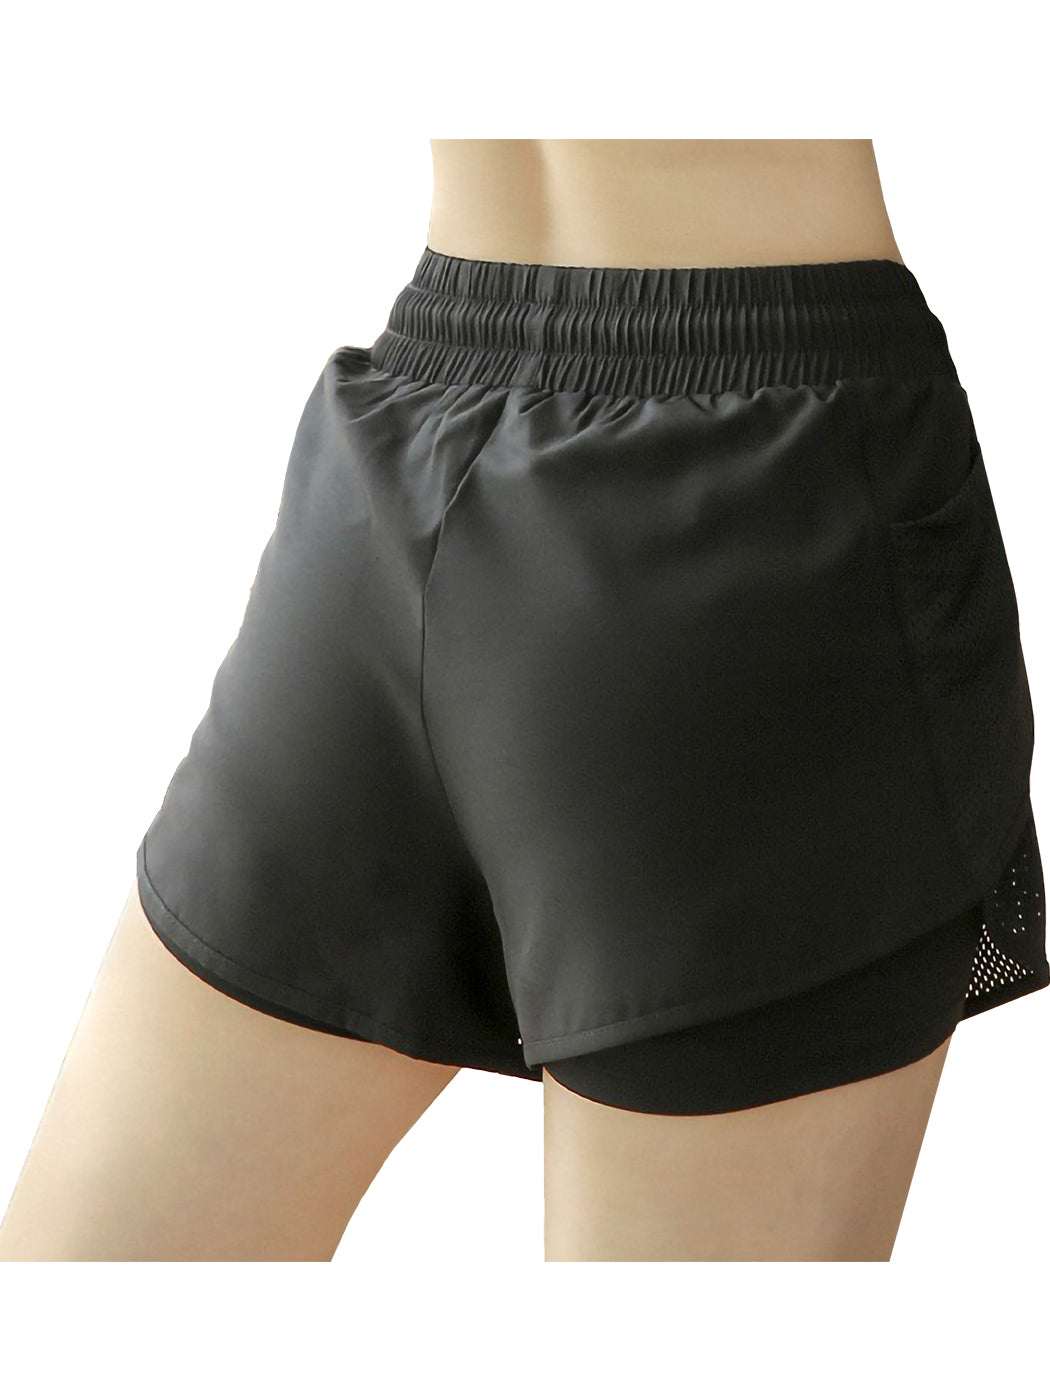 Running Shorts Quick-Dry 2 in 1 Workout Gym Shorts with Pockets